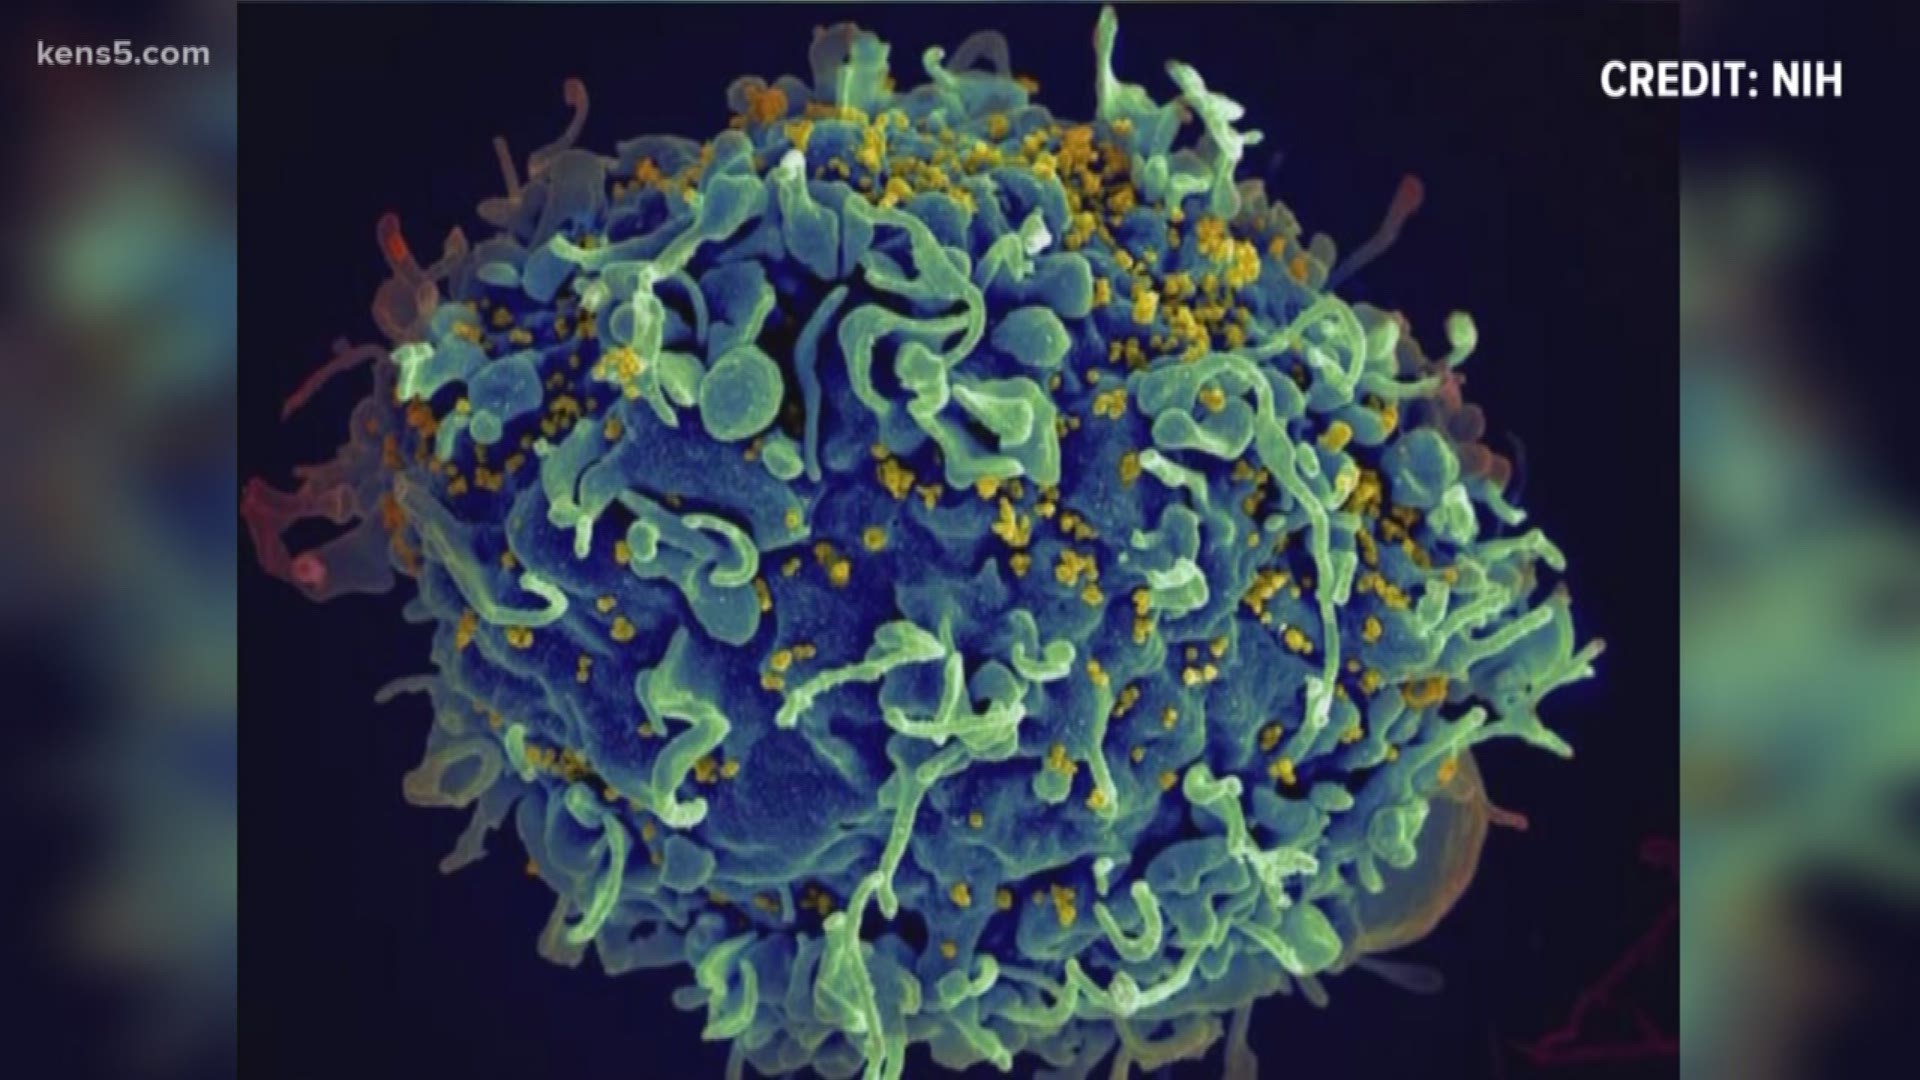 Scientists at the Texas Biomedical Research Institute say a potentially universal treatment could be the long-term result in the global fight against HIV.